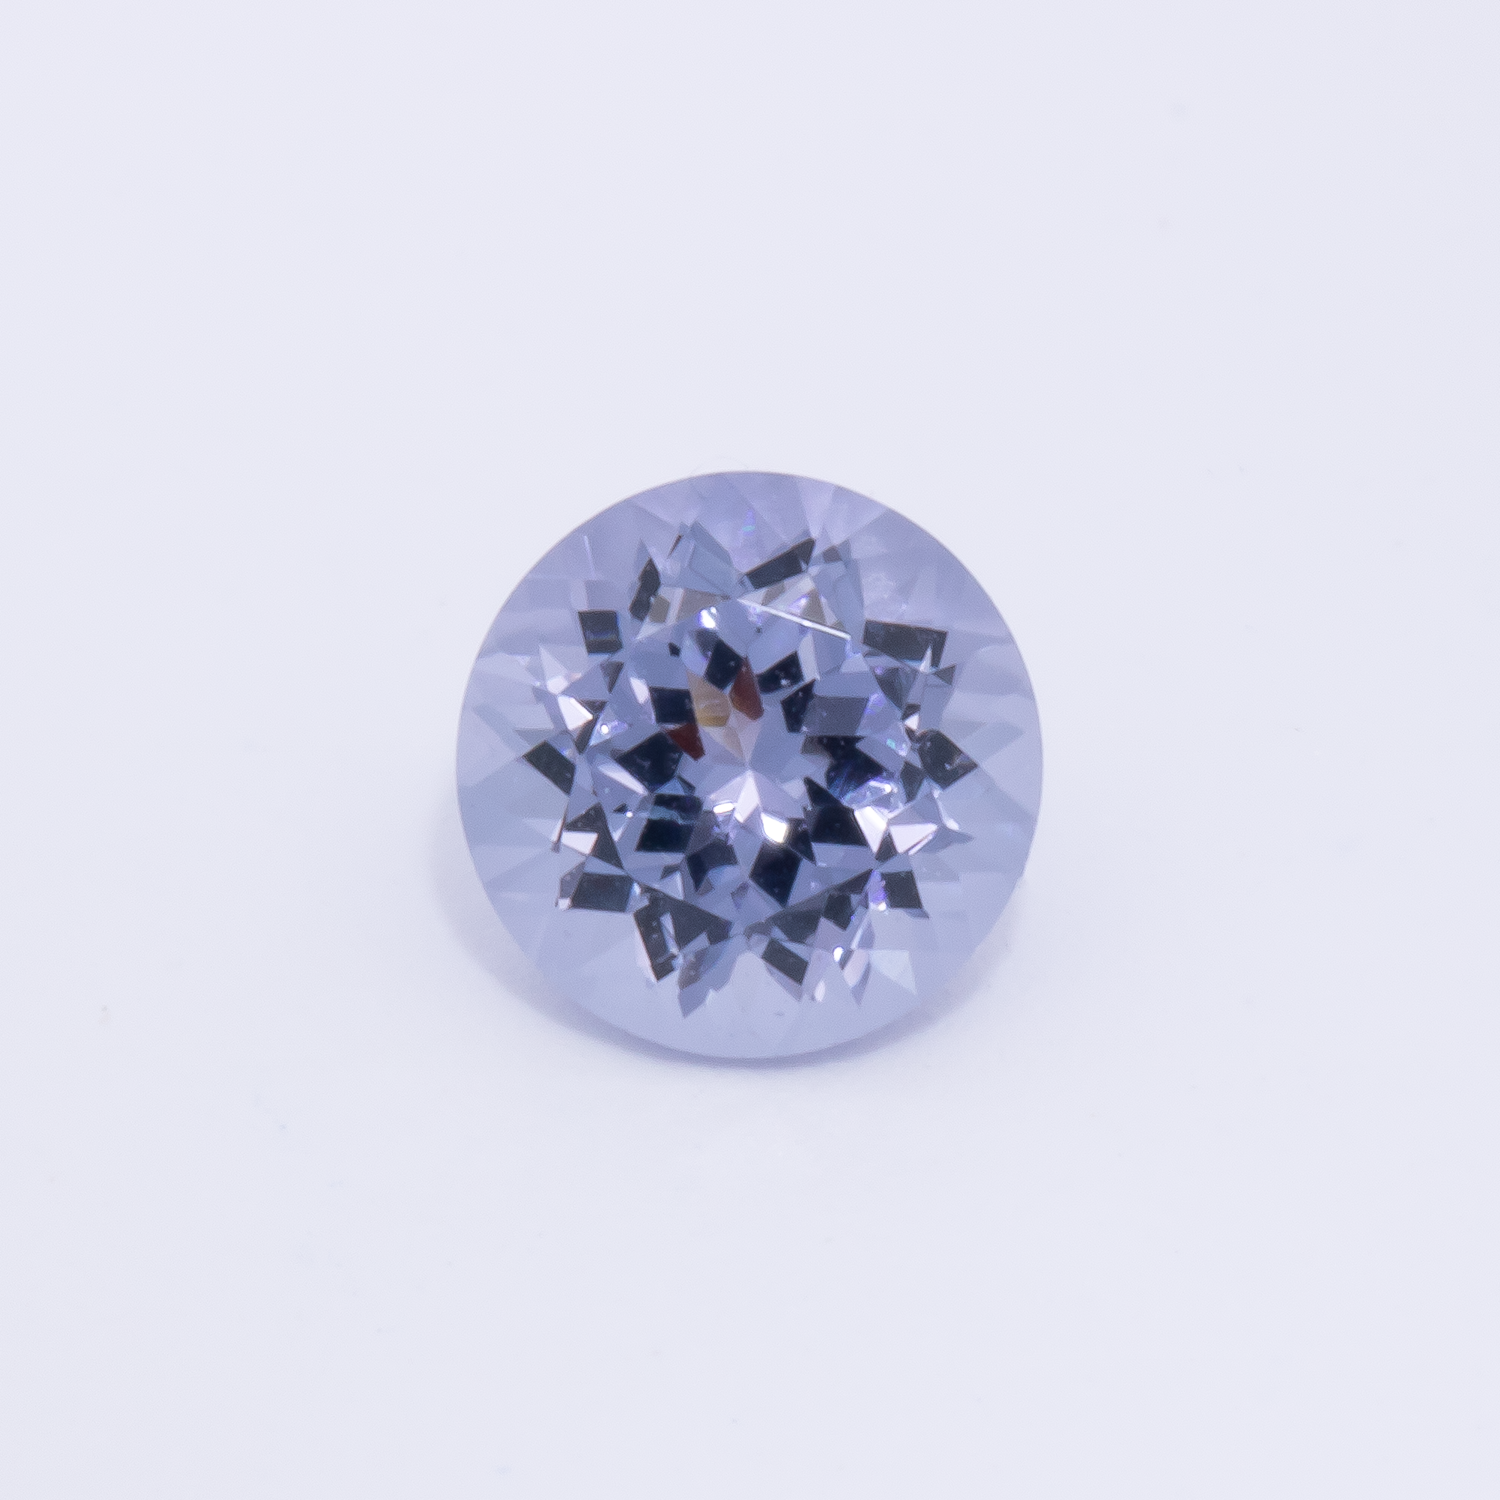 Spinell - lila, rund, 4.5x4.5 mm, 0.44 cts, Nr. SP90066